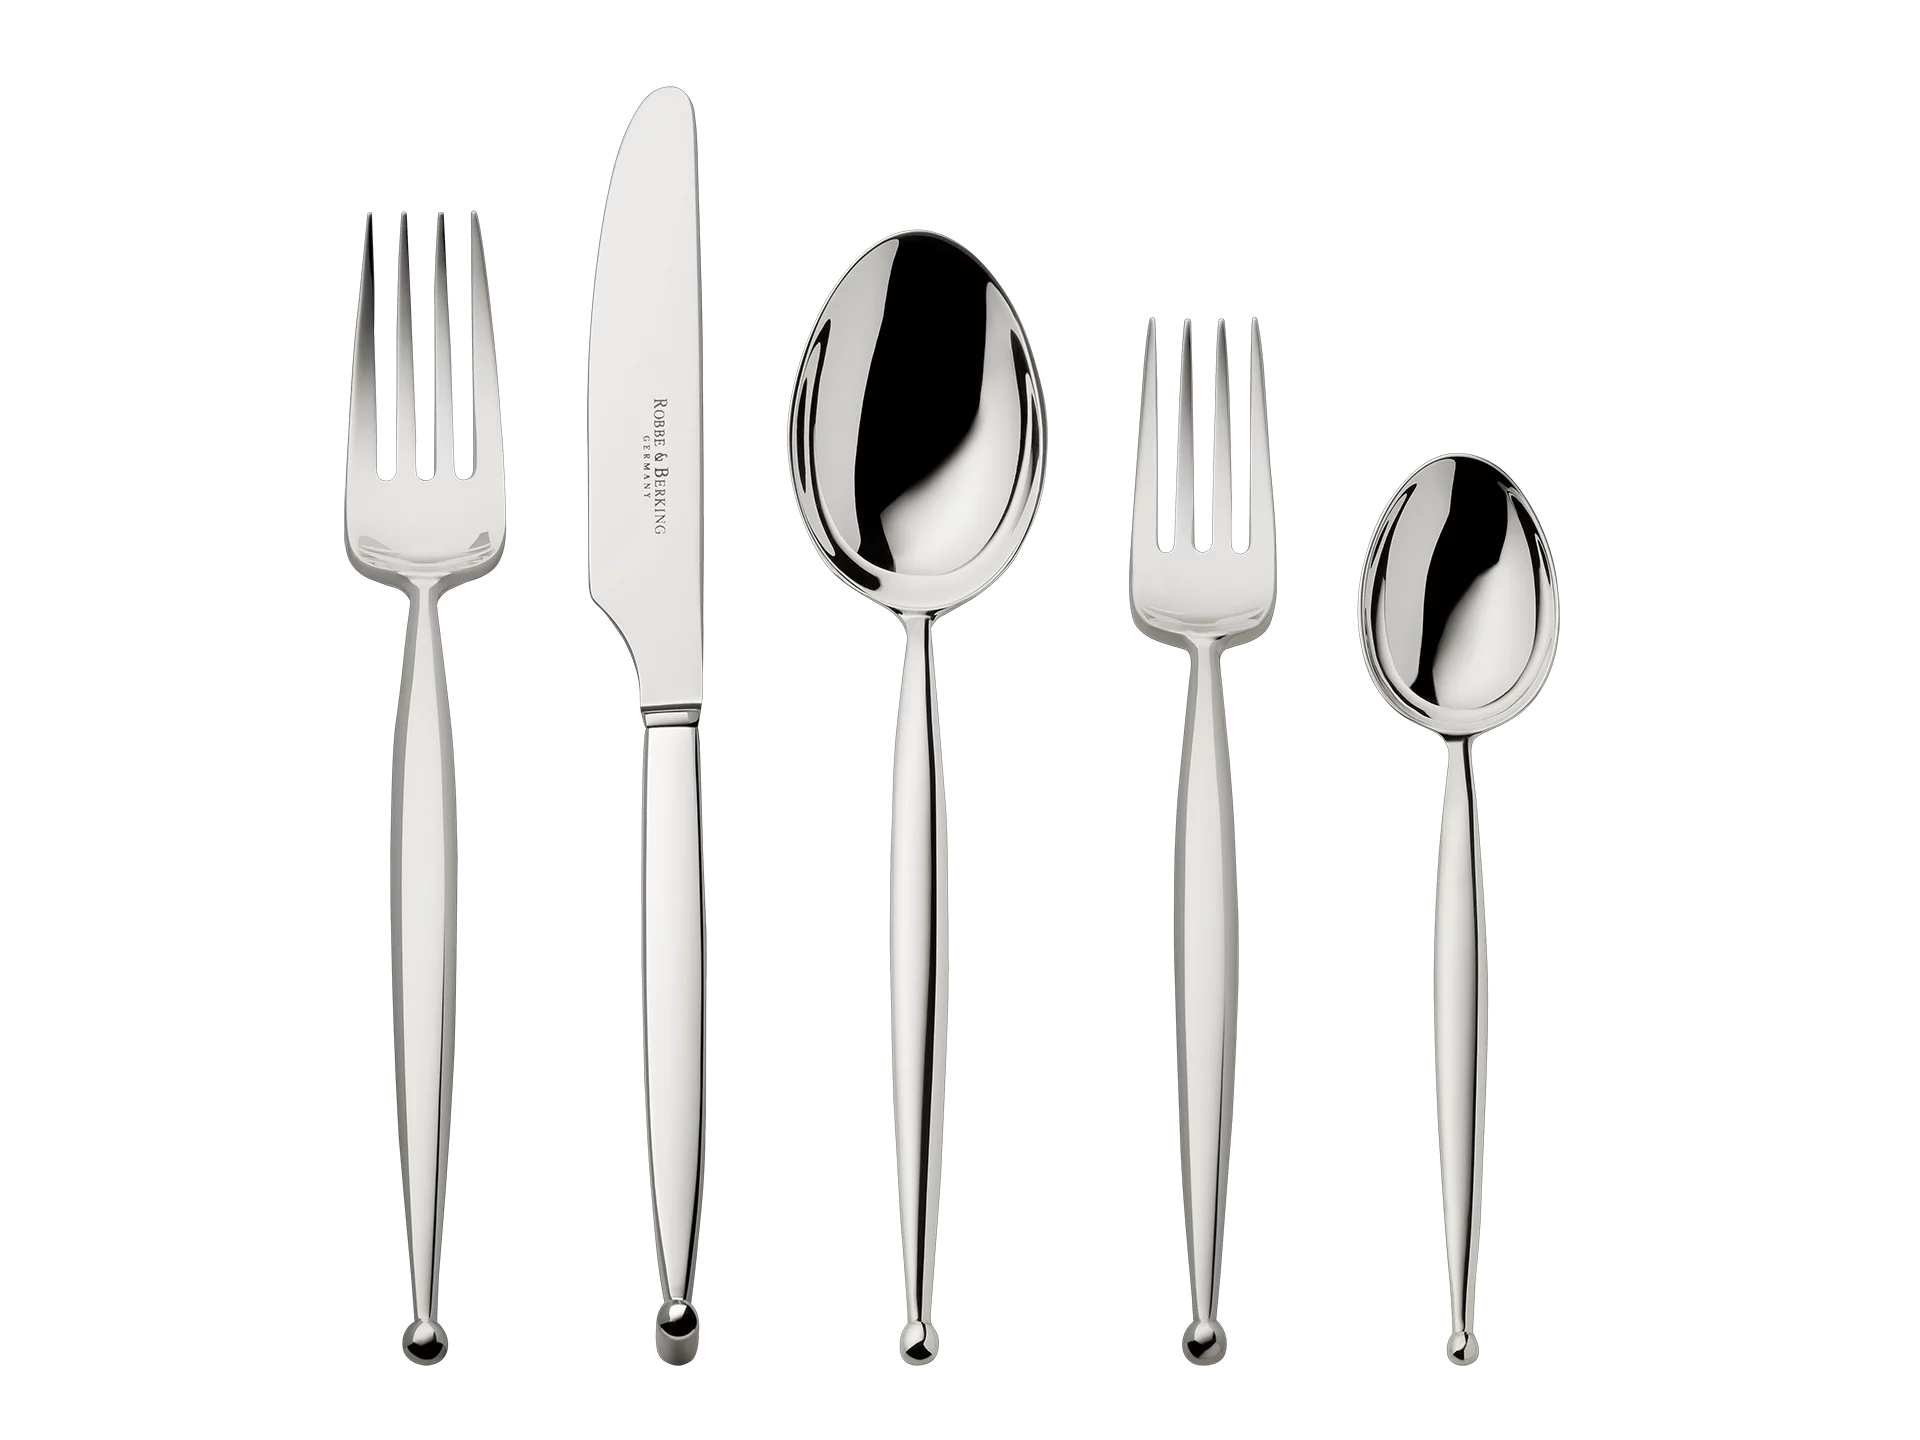 Gio 5-piece place setting (150g massive silverplated)